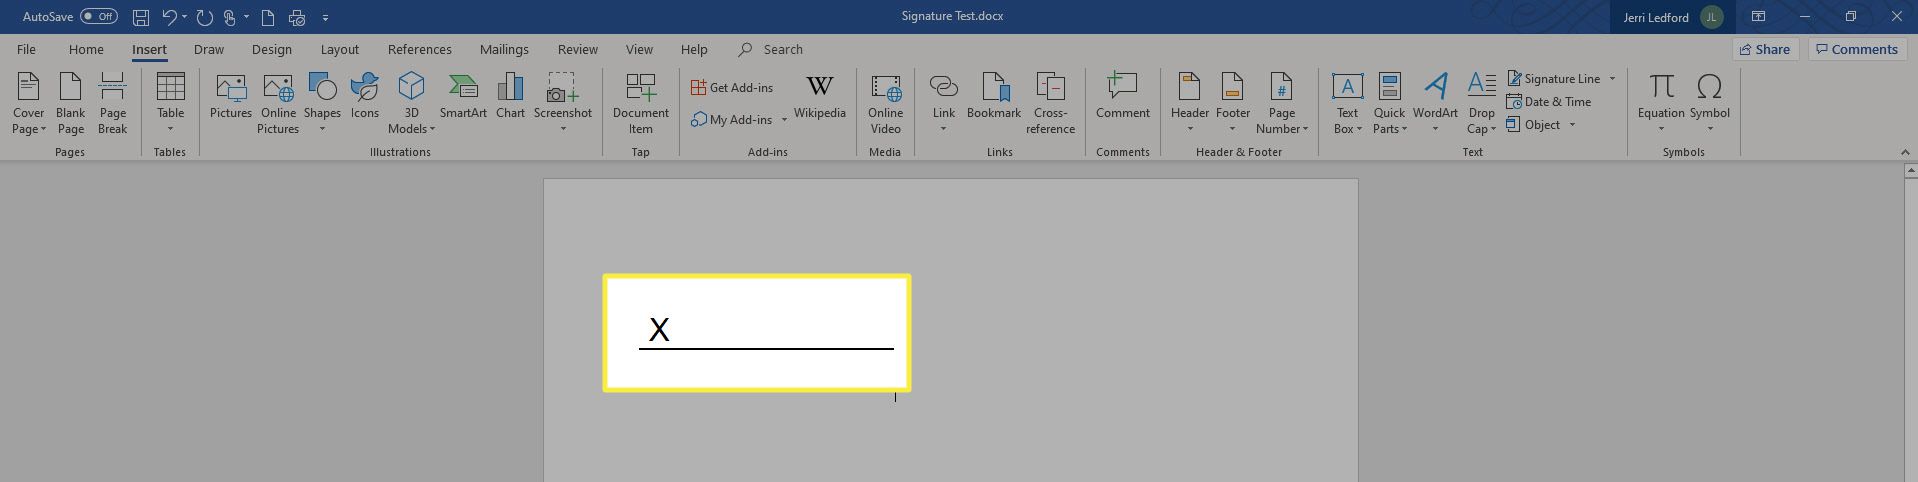 how to insert digital signature in word mobile